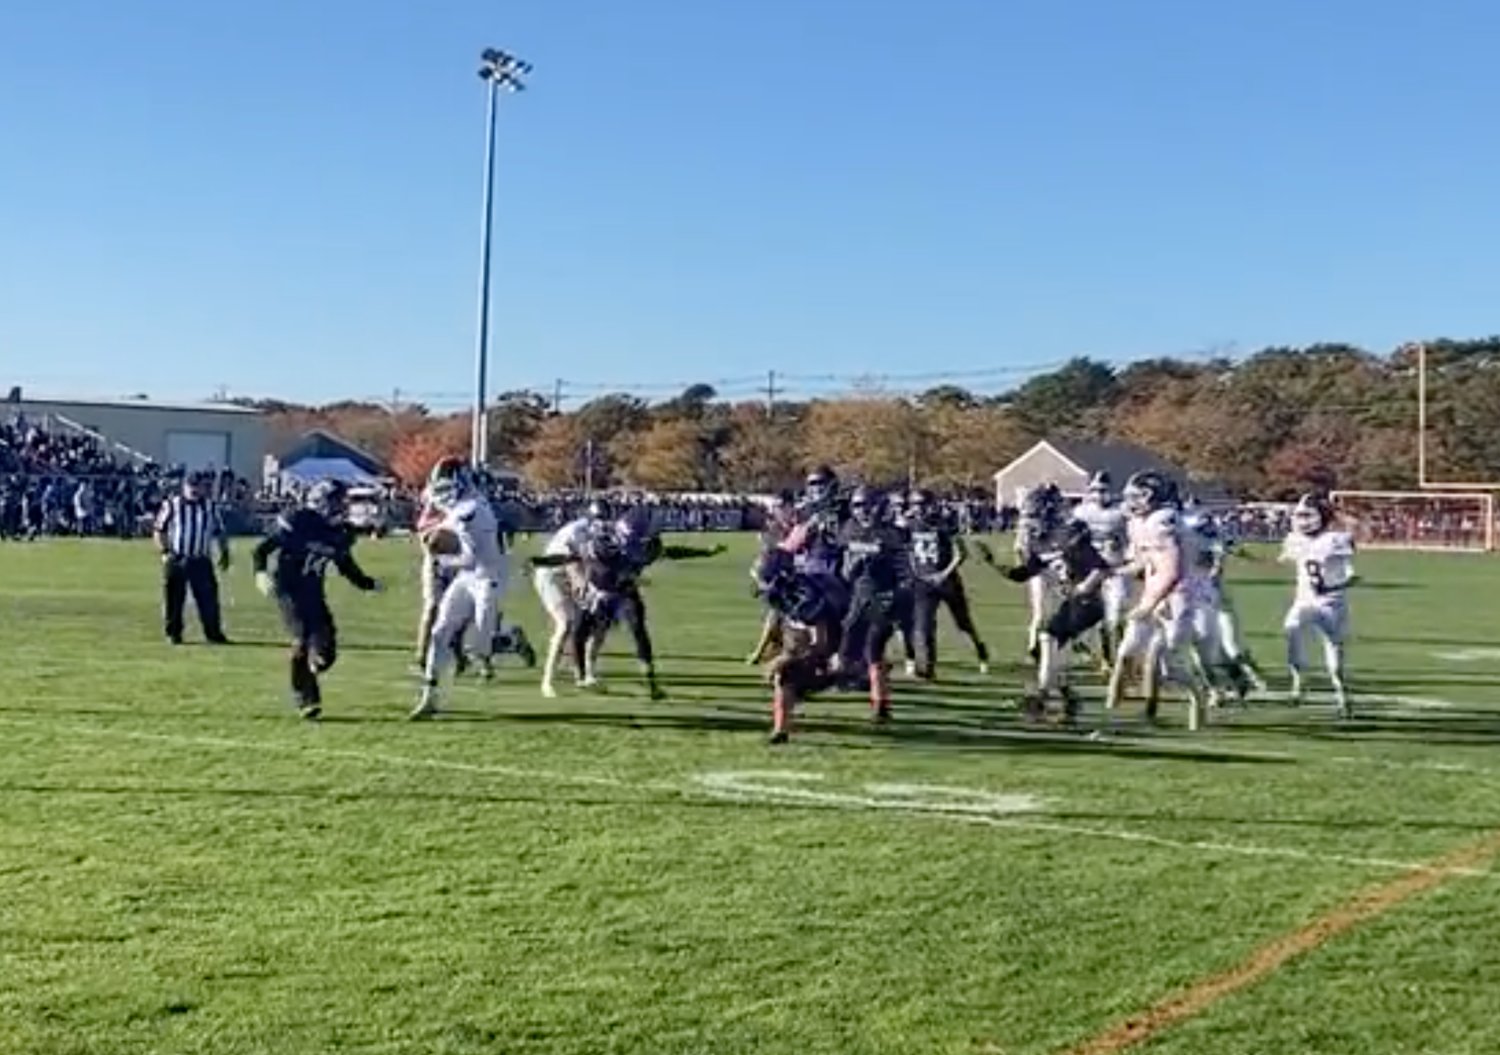 Kareem Maxwell breaks away to score Nantucket's second touchdown of the day against Martha's Vineyard Saturday.